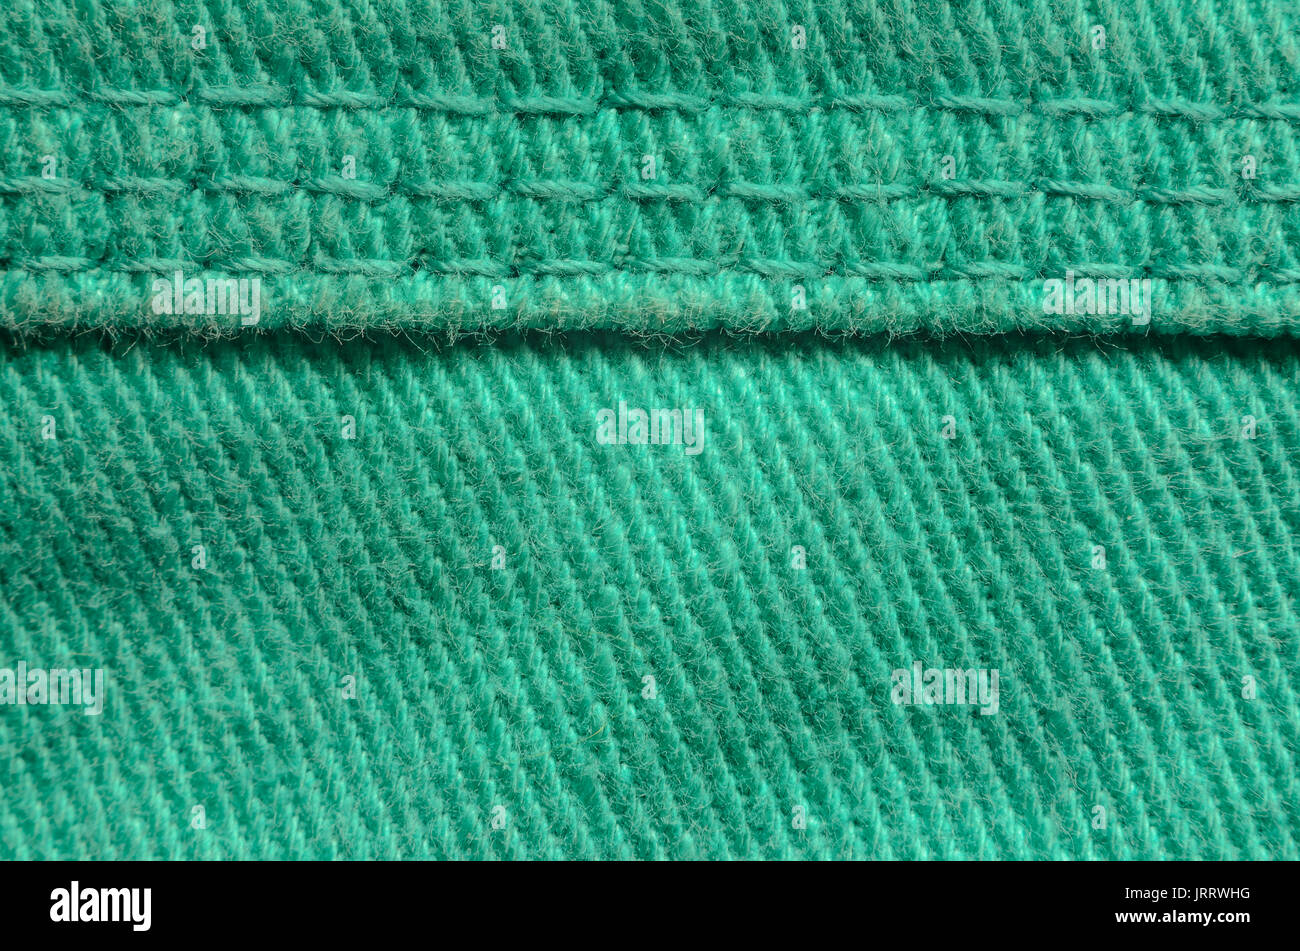 Green Denim Tissue Structure Textile Texture Close-up. Macro shot of the finishing seam on a green jeans product. Stock Photo